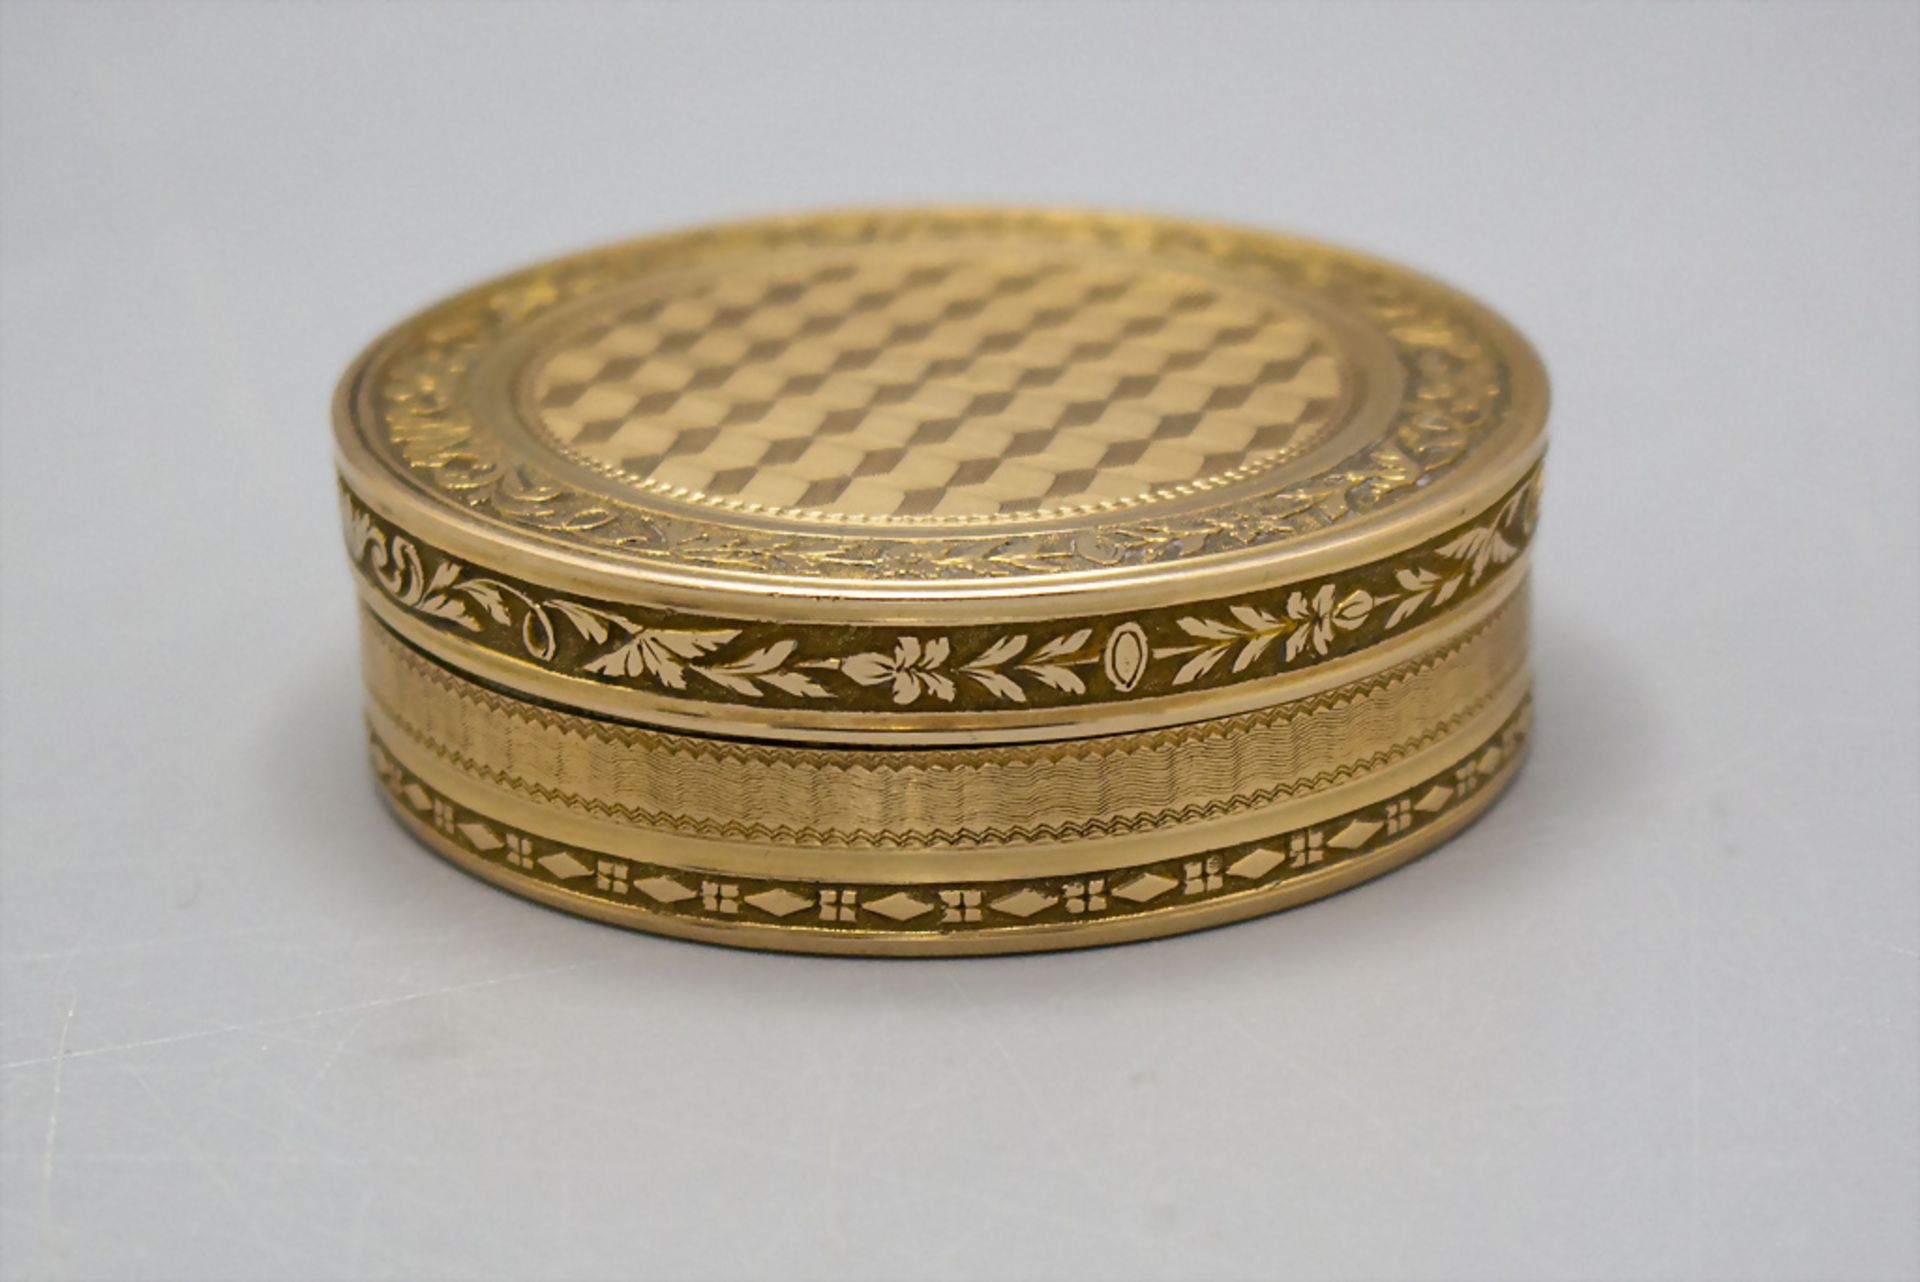 Gold Tabatiere / An 18 ct gold snuff box, Frankreich, um 1800 - Image 2 of 7